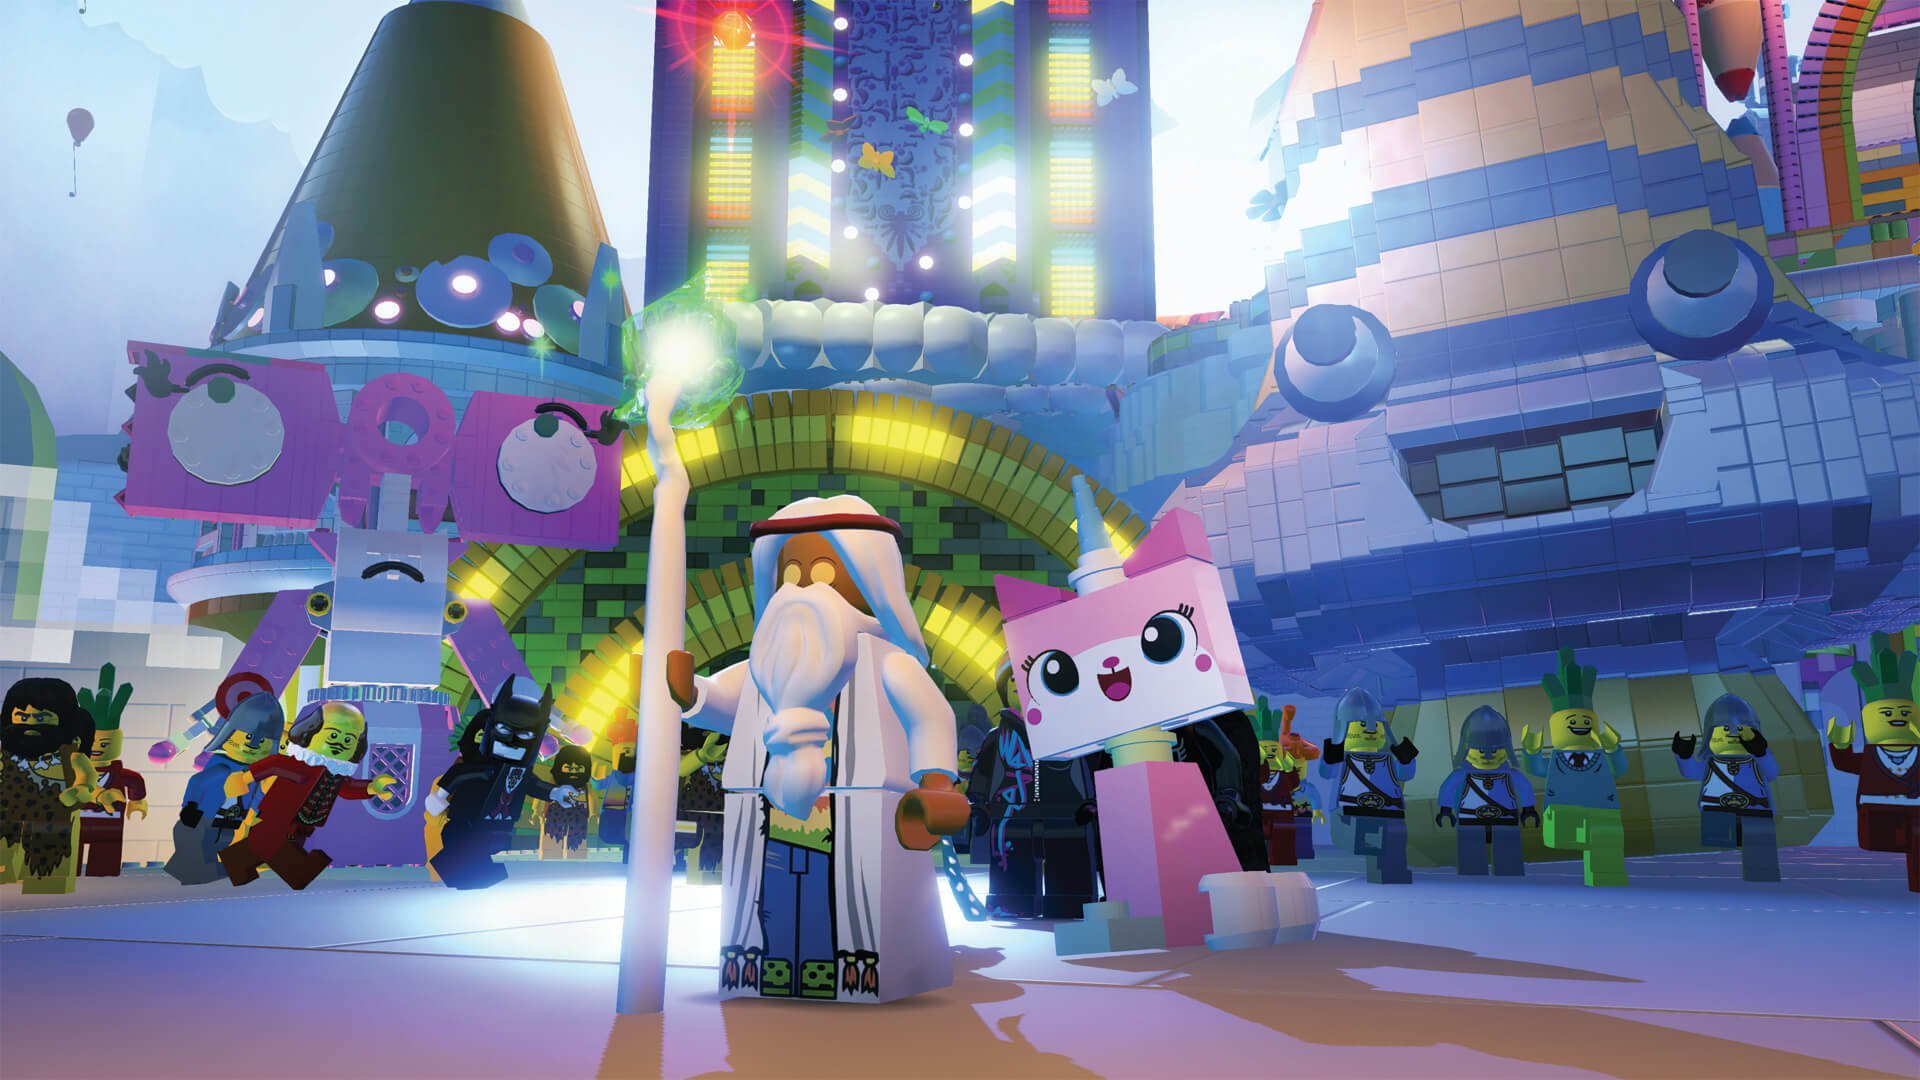 The LEGO Movie Videogame Wallpapers